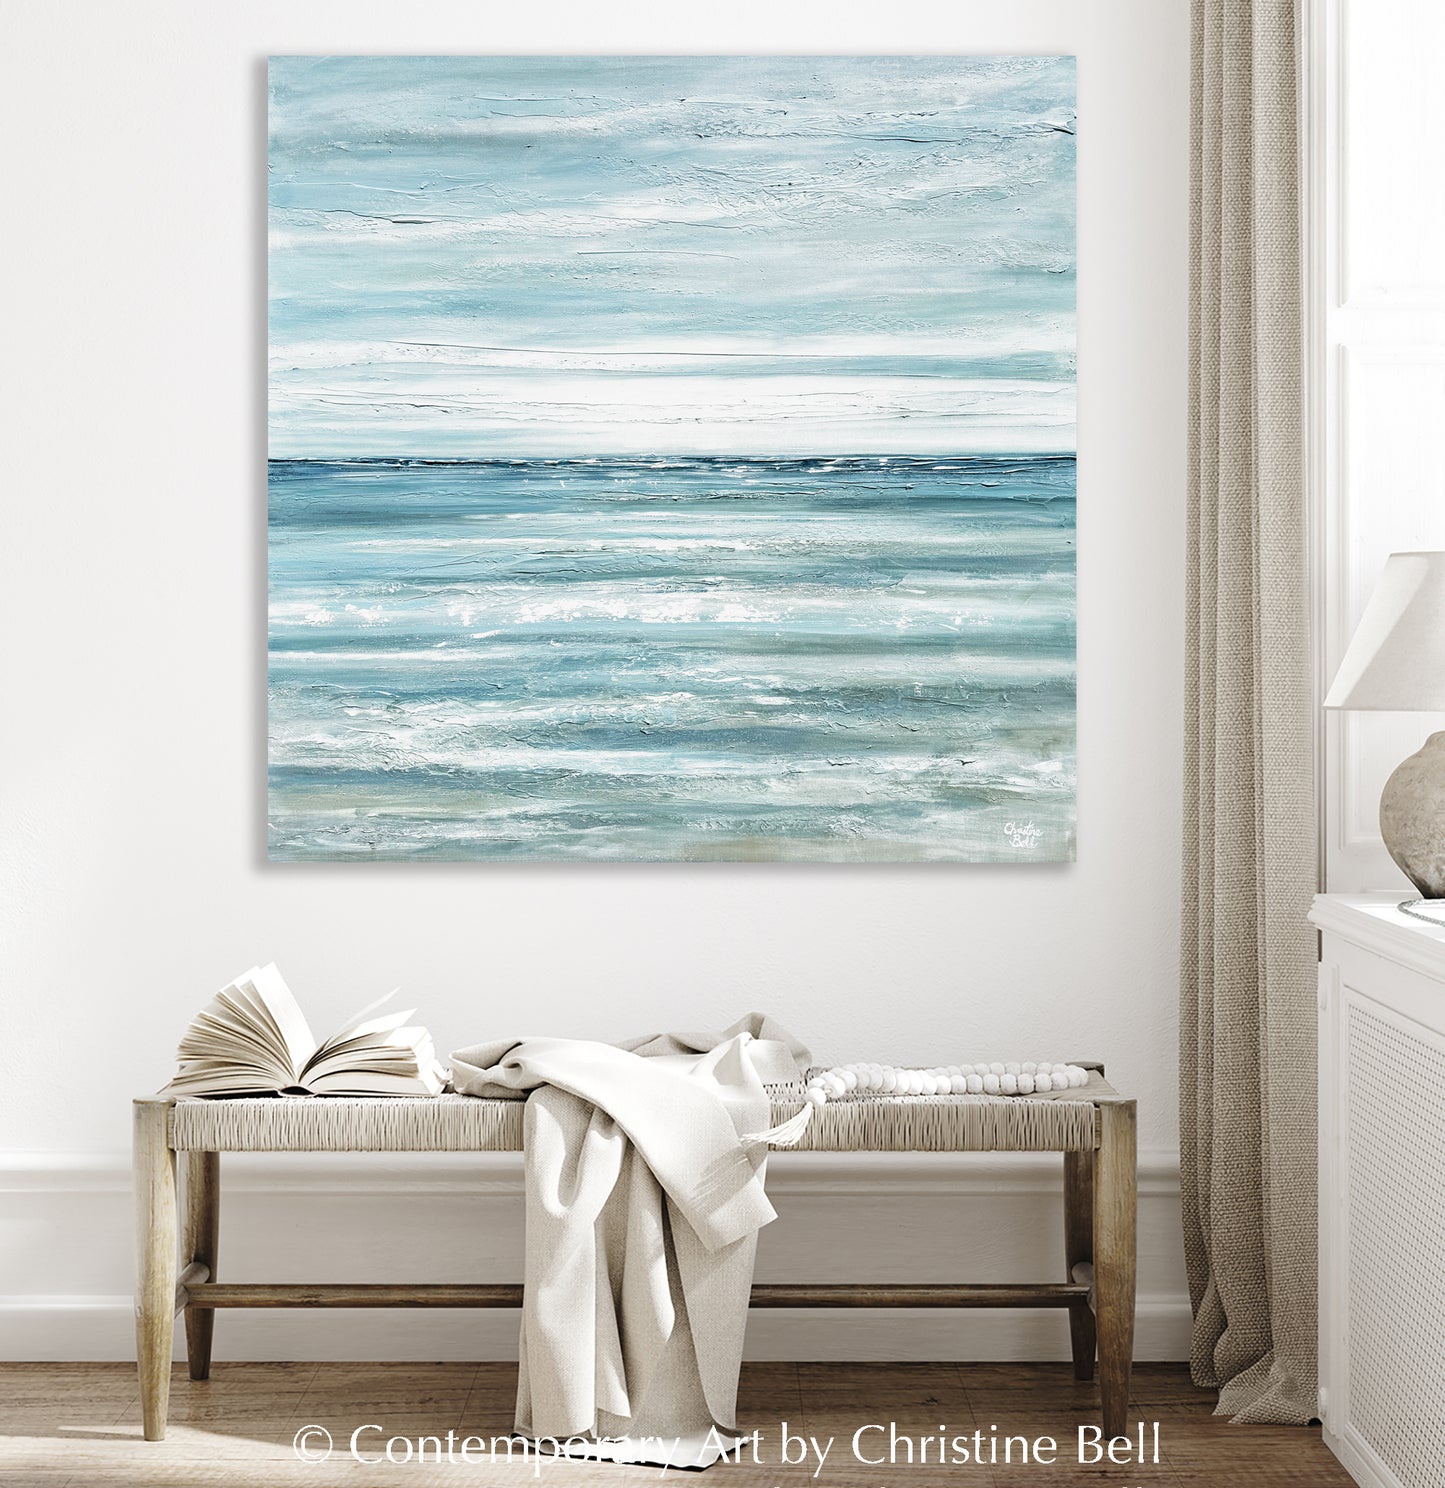 Modern Coastal Abstract Paintings Neutral Minimalist Fine Art Home Decor Wall Art Floral White Flowers, Coastal Ocean Seascapes by Artist Christine Bell